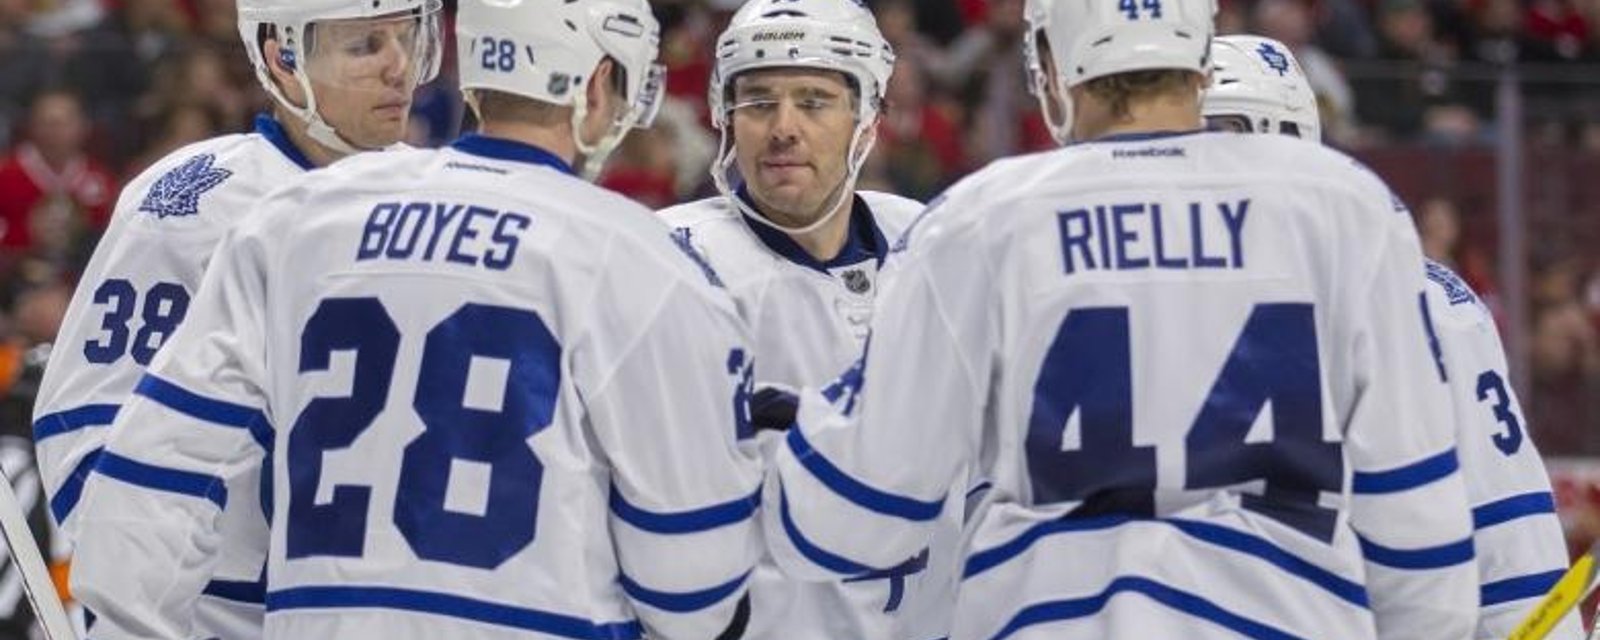 The Maple Leafs may have lost one of their best trading chips.